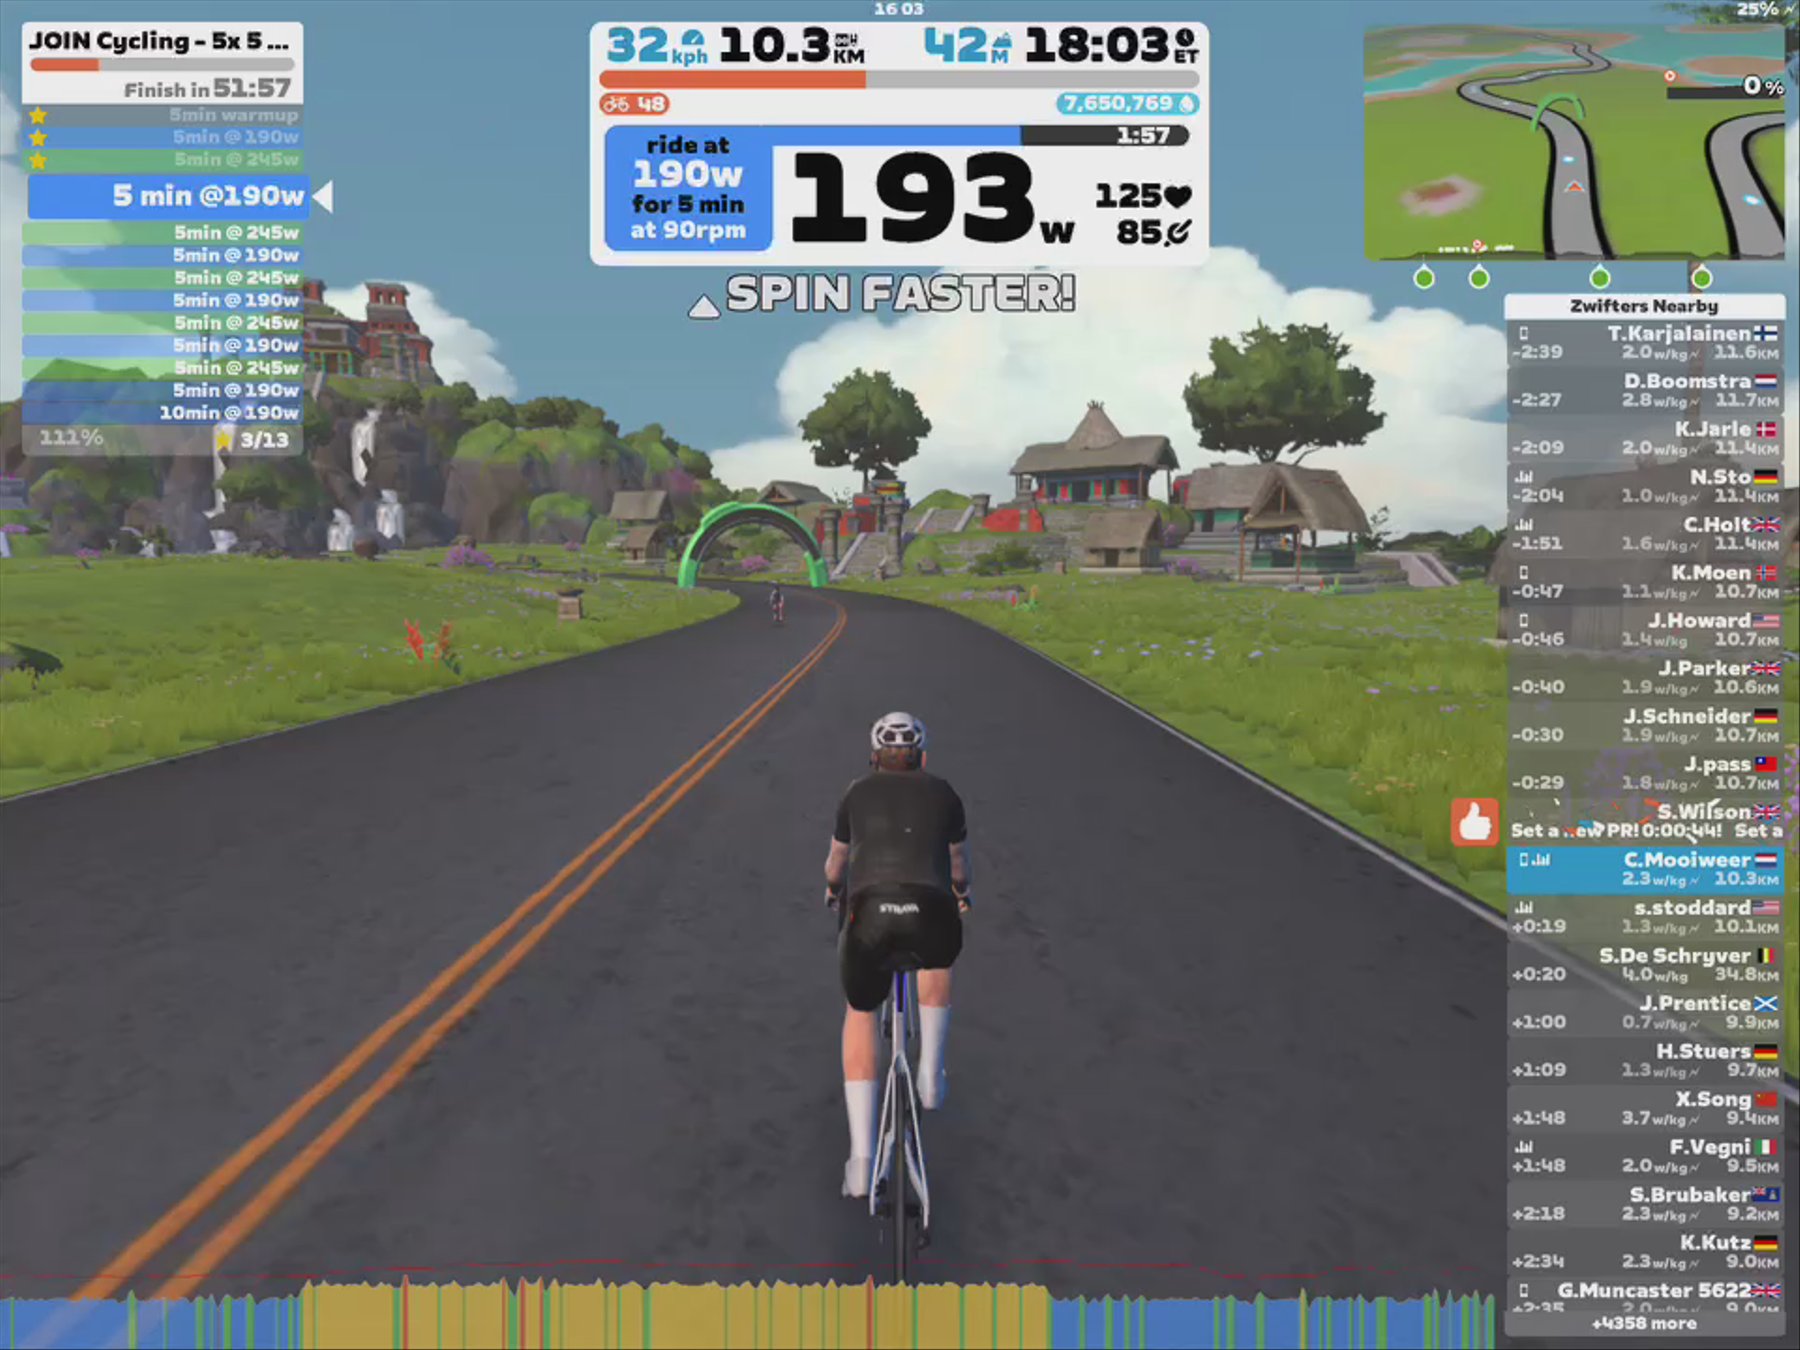 Zwift - JOIN Cycling - 5x 5 min tempo in Watopia